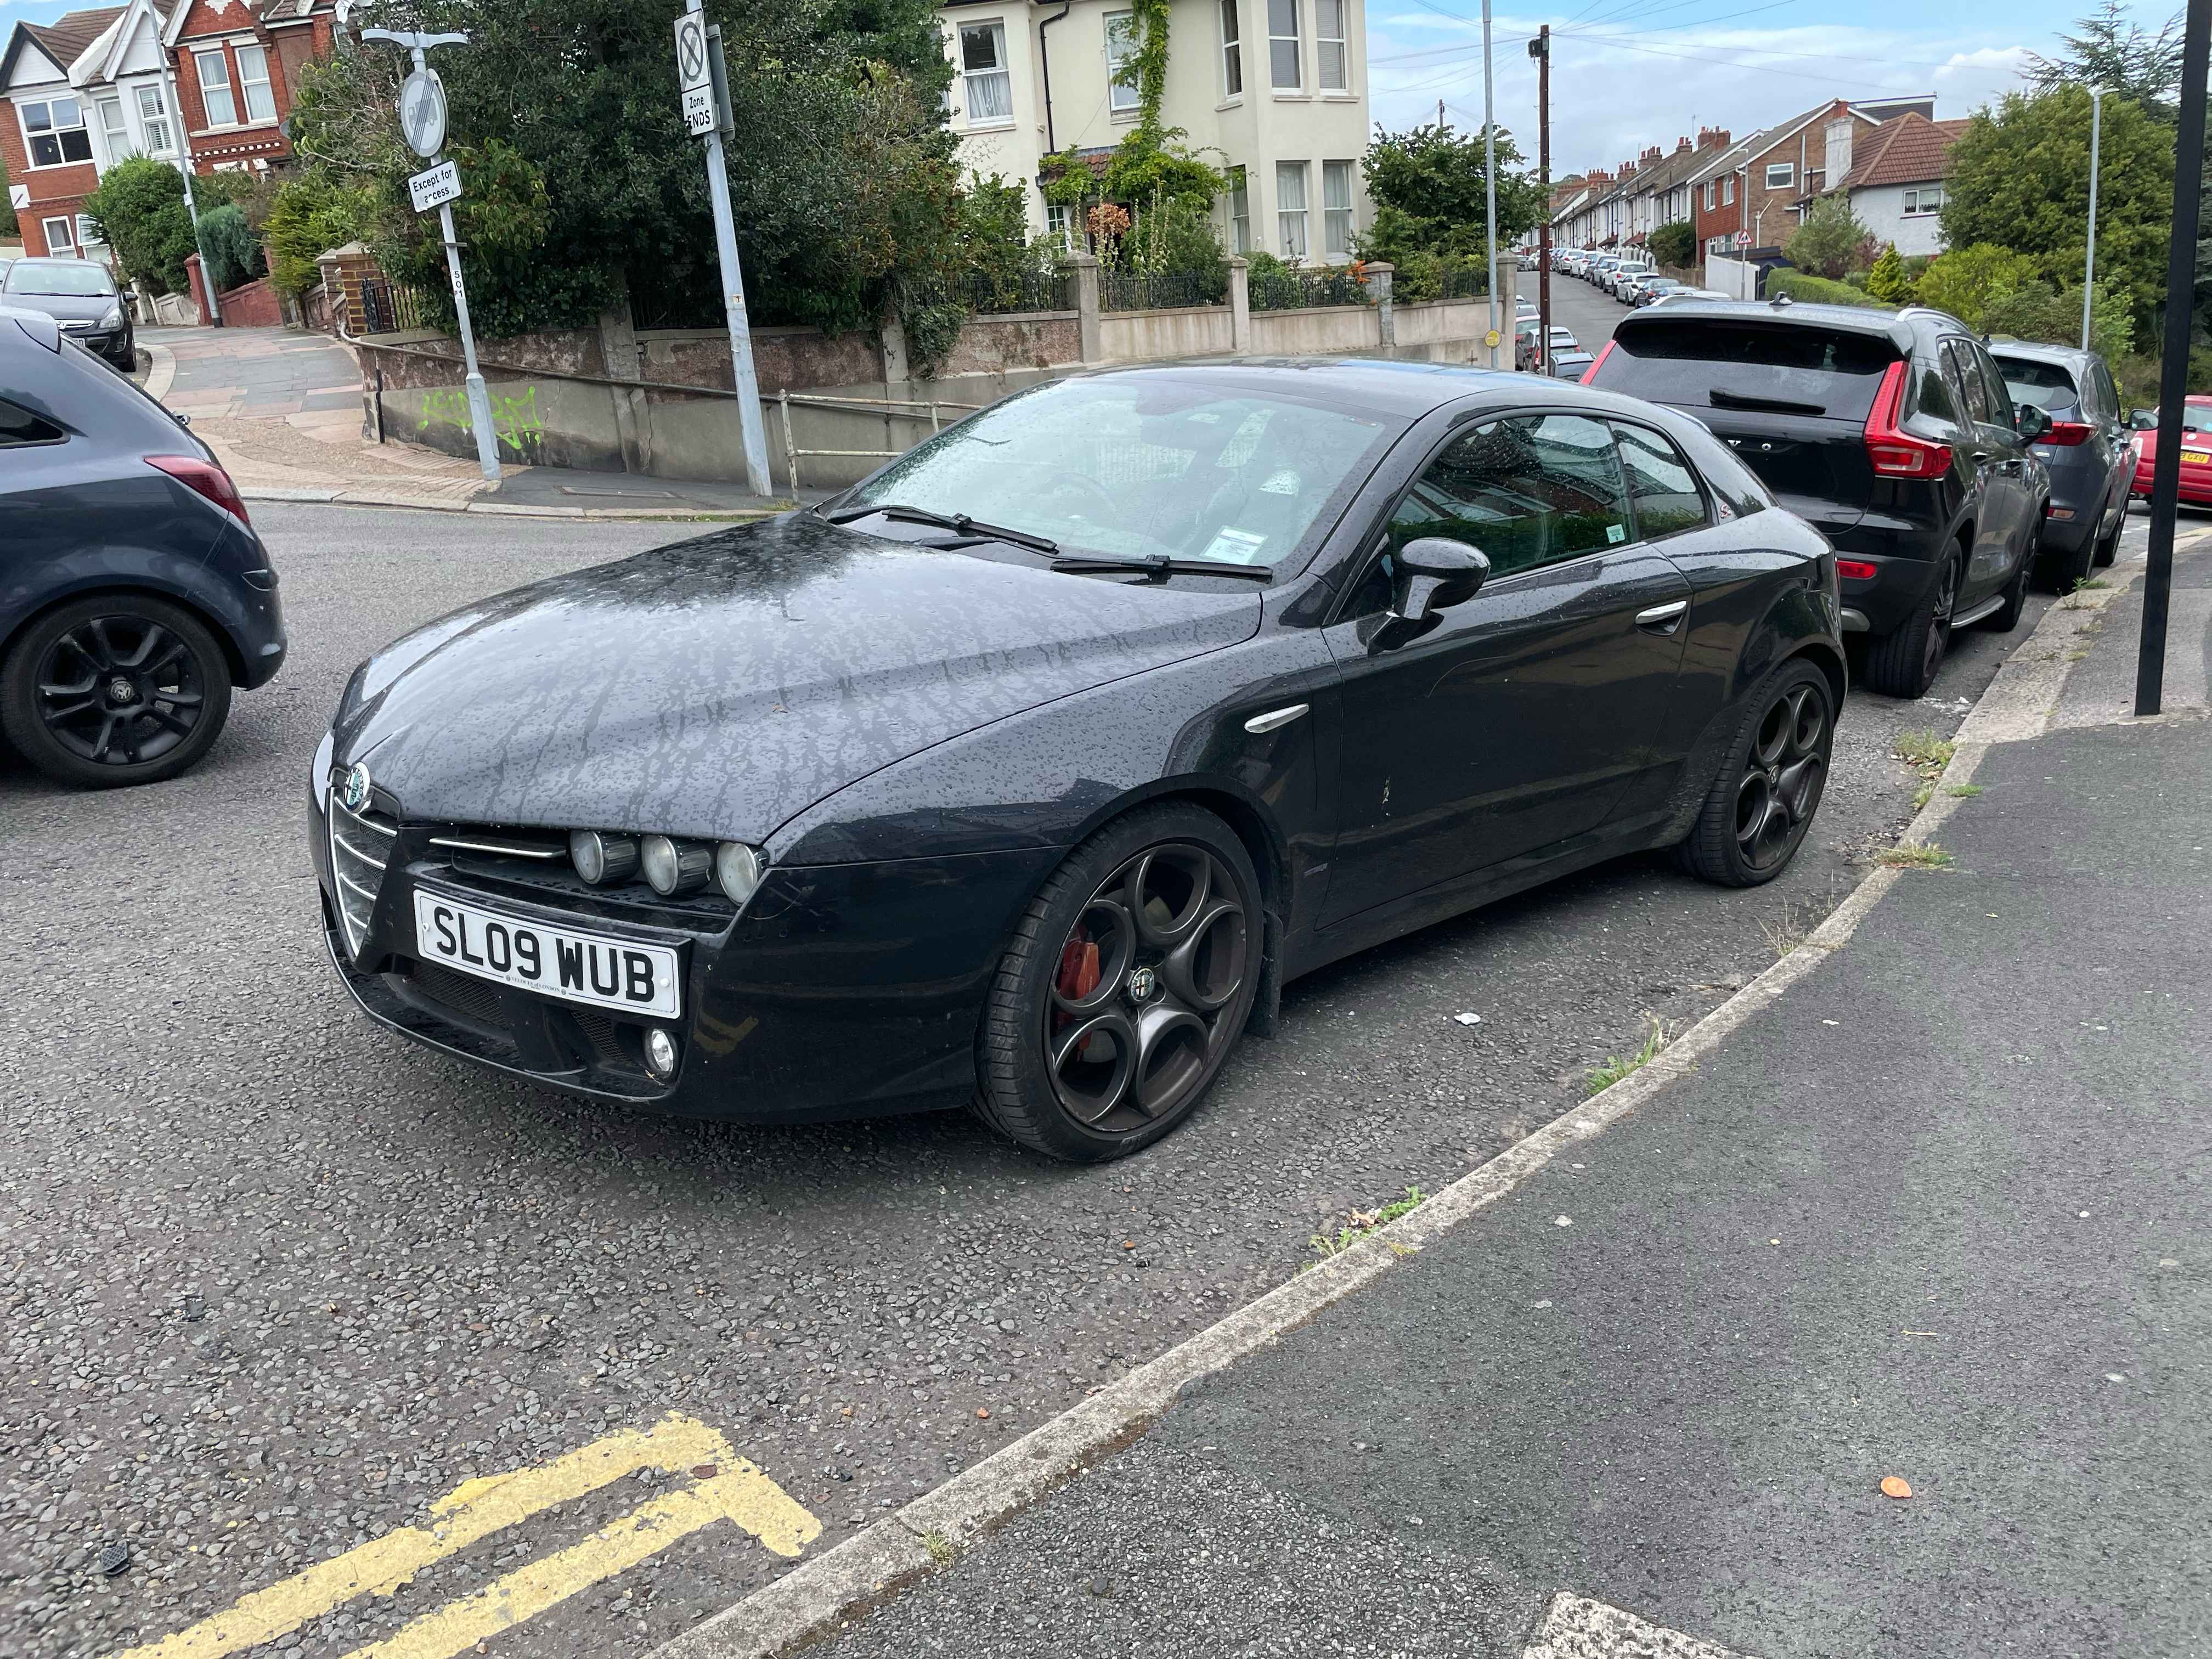 Photograph of SL09 WUB - a Black Alfa Romeo Brera parked in Hollingdean by a non-resident. The seventh of twenty photographs supplied by the residents of Hollingdean.